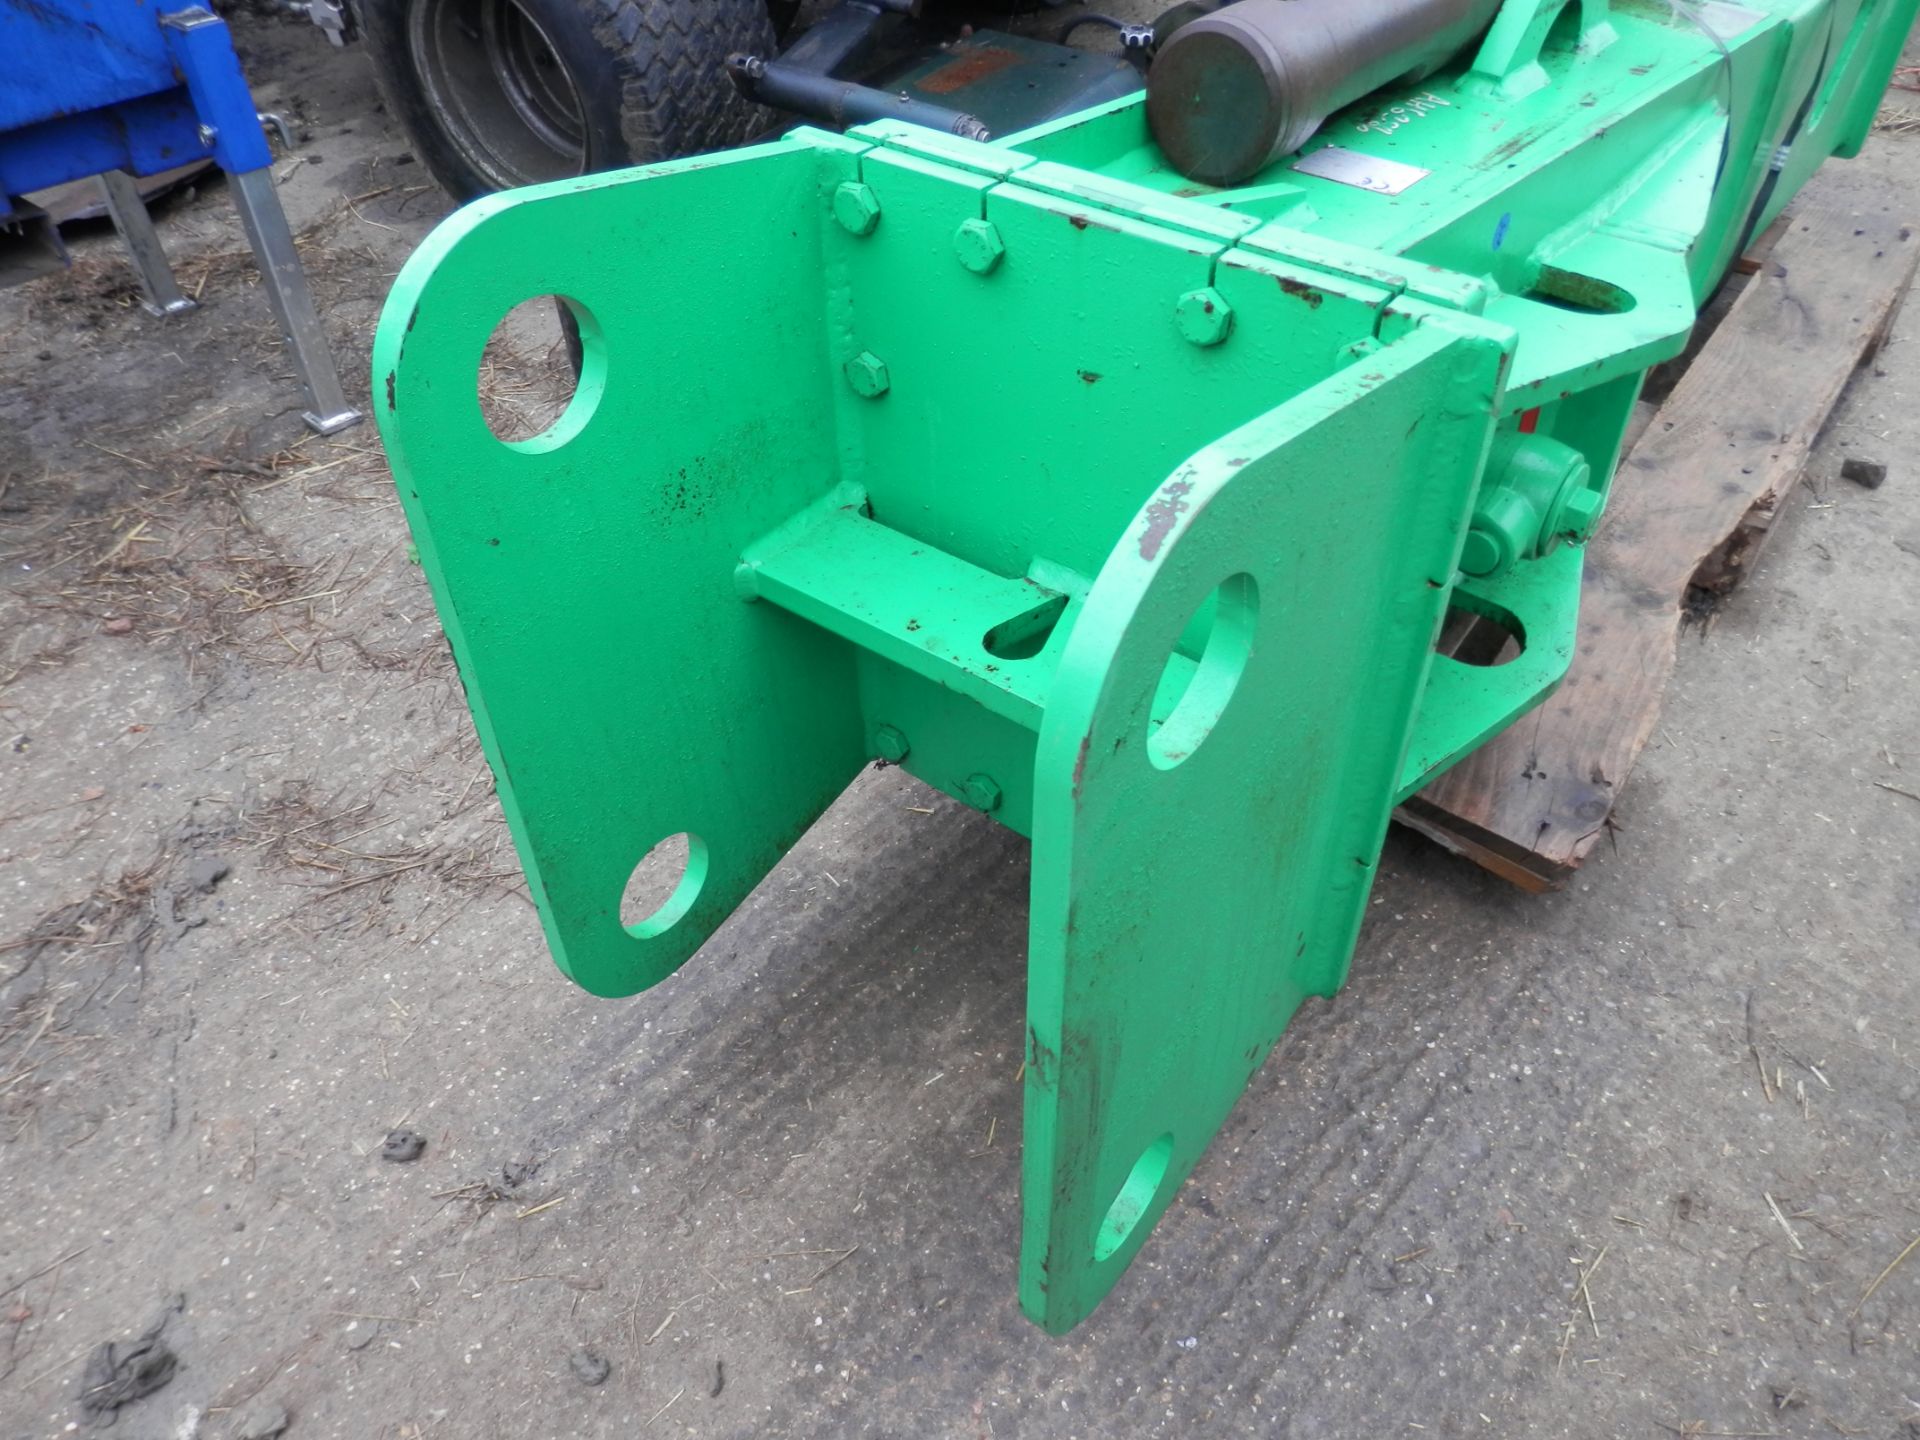 DS - NEW 2016 BREAKER ATTACHMENT FOR DIGGER, MODEL BRH501SIL, COST £15000 NEW   NEW & UNUSED.   2016 - Image 3 of 6